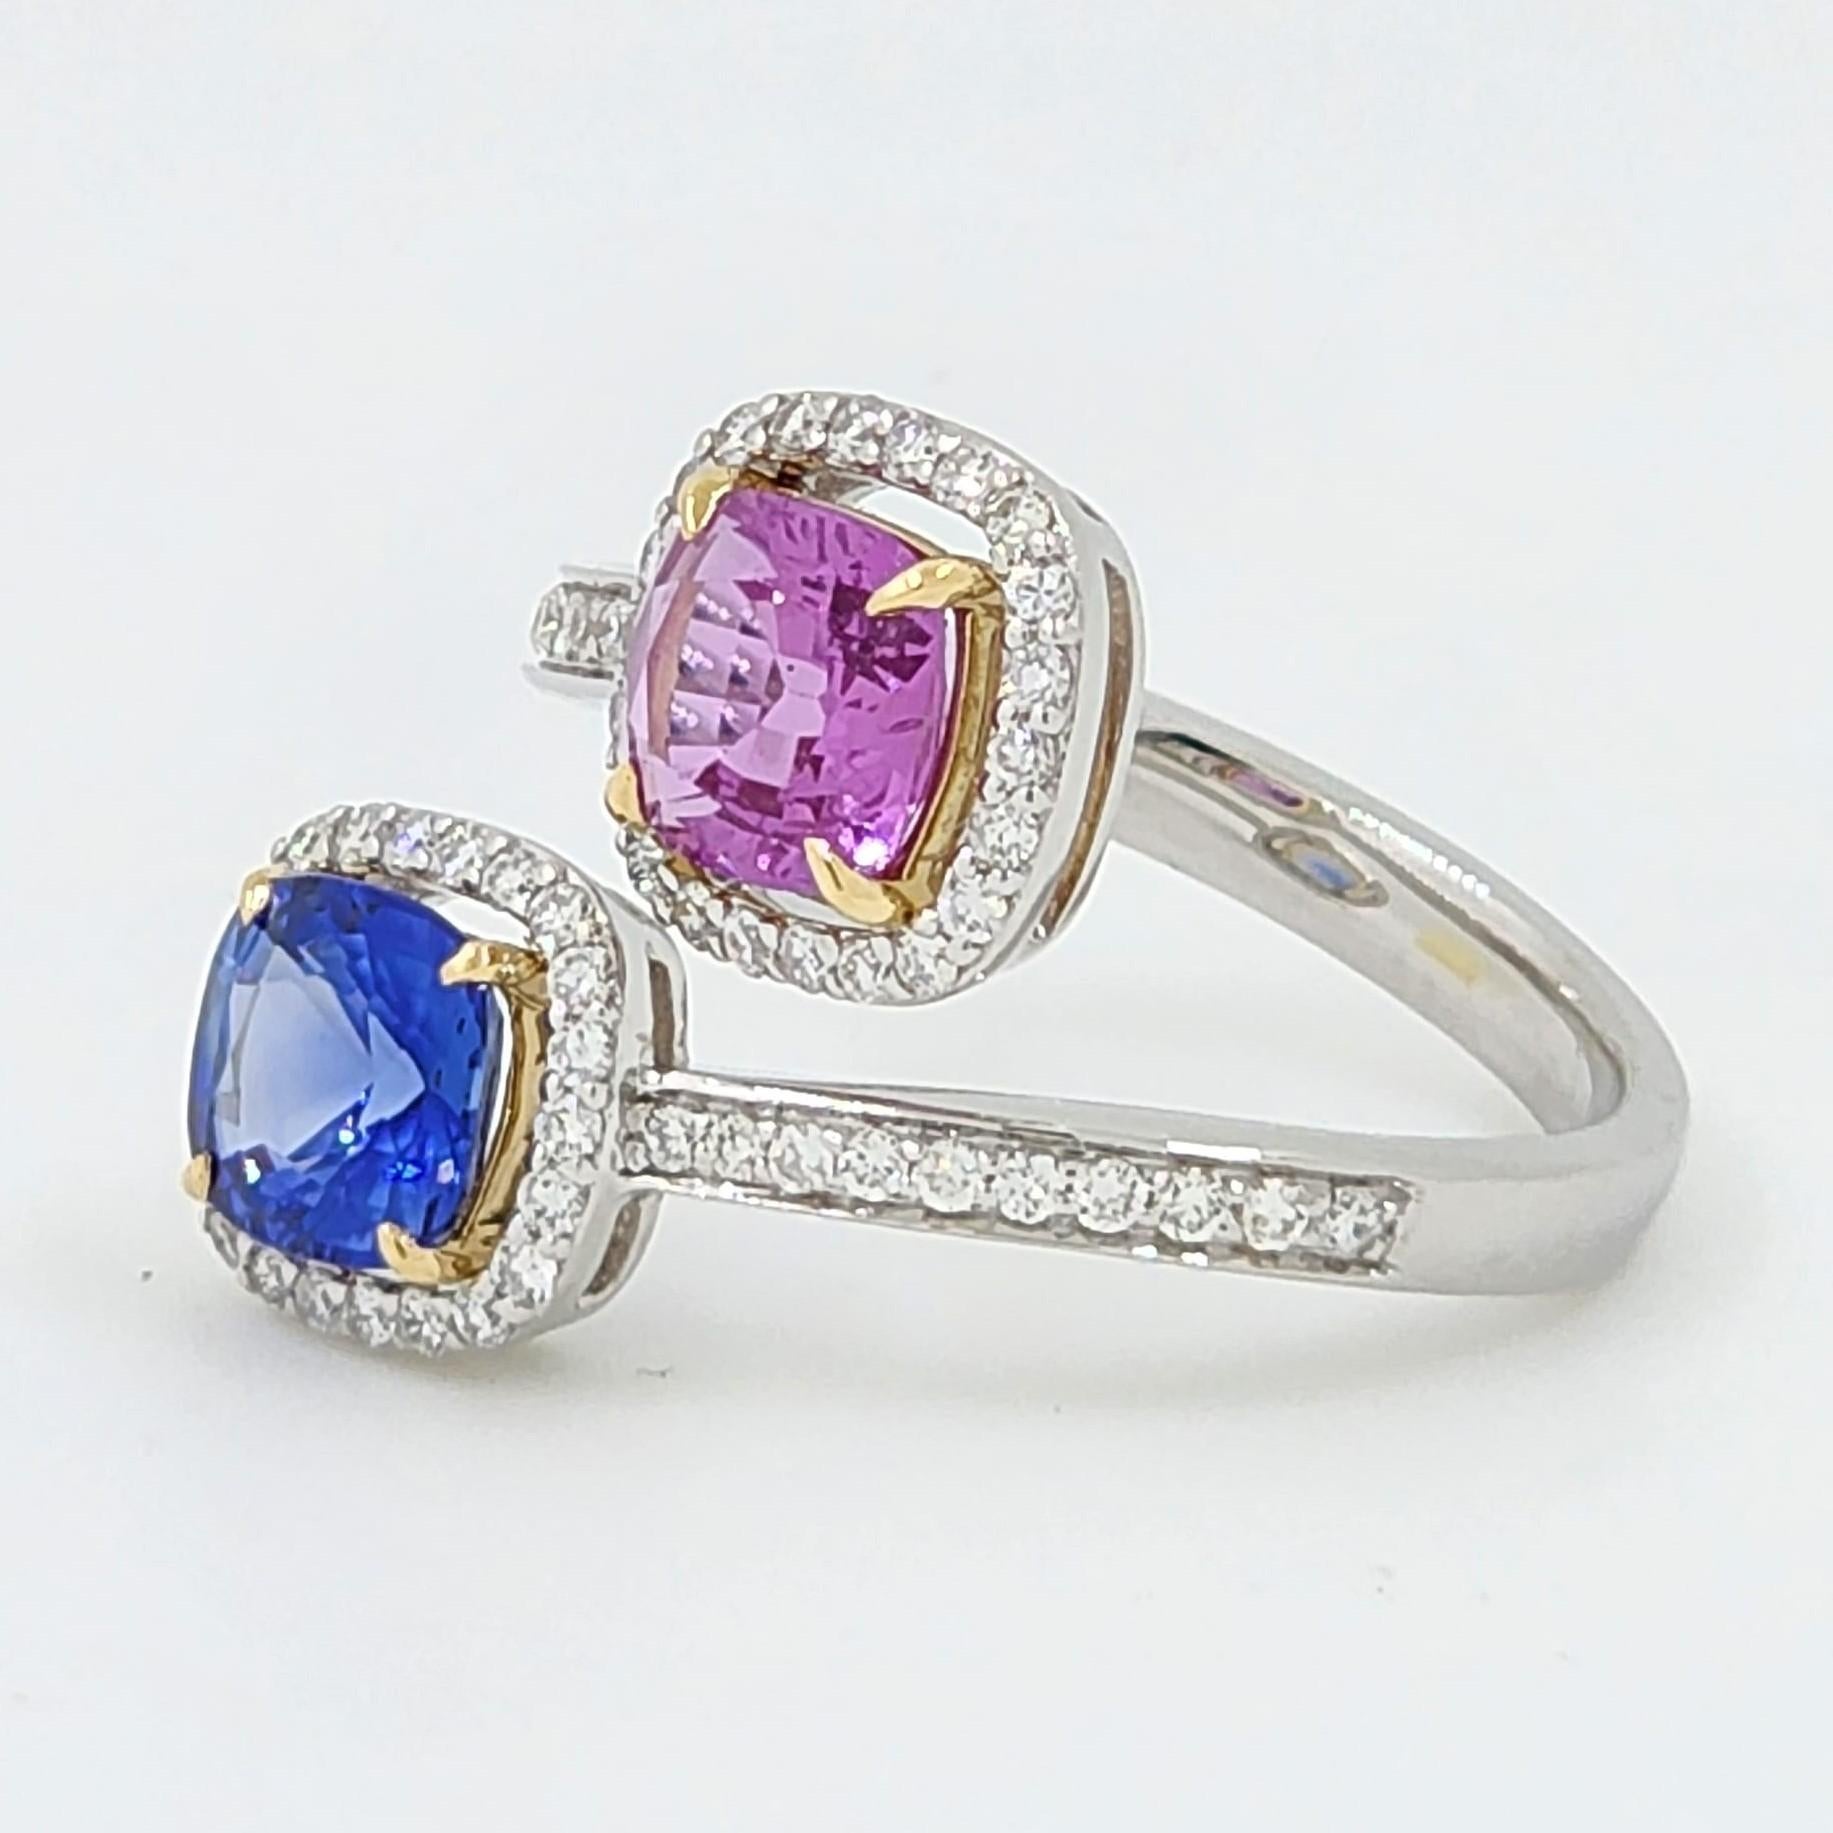 Contemporary Blue and Pink Sapphire Diamond Toi Et Moi Ring in 18 Karat Yellow and White Gold